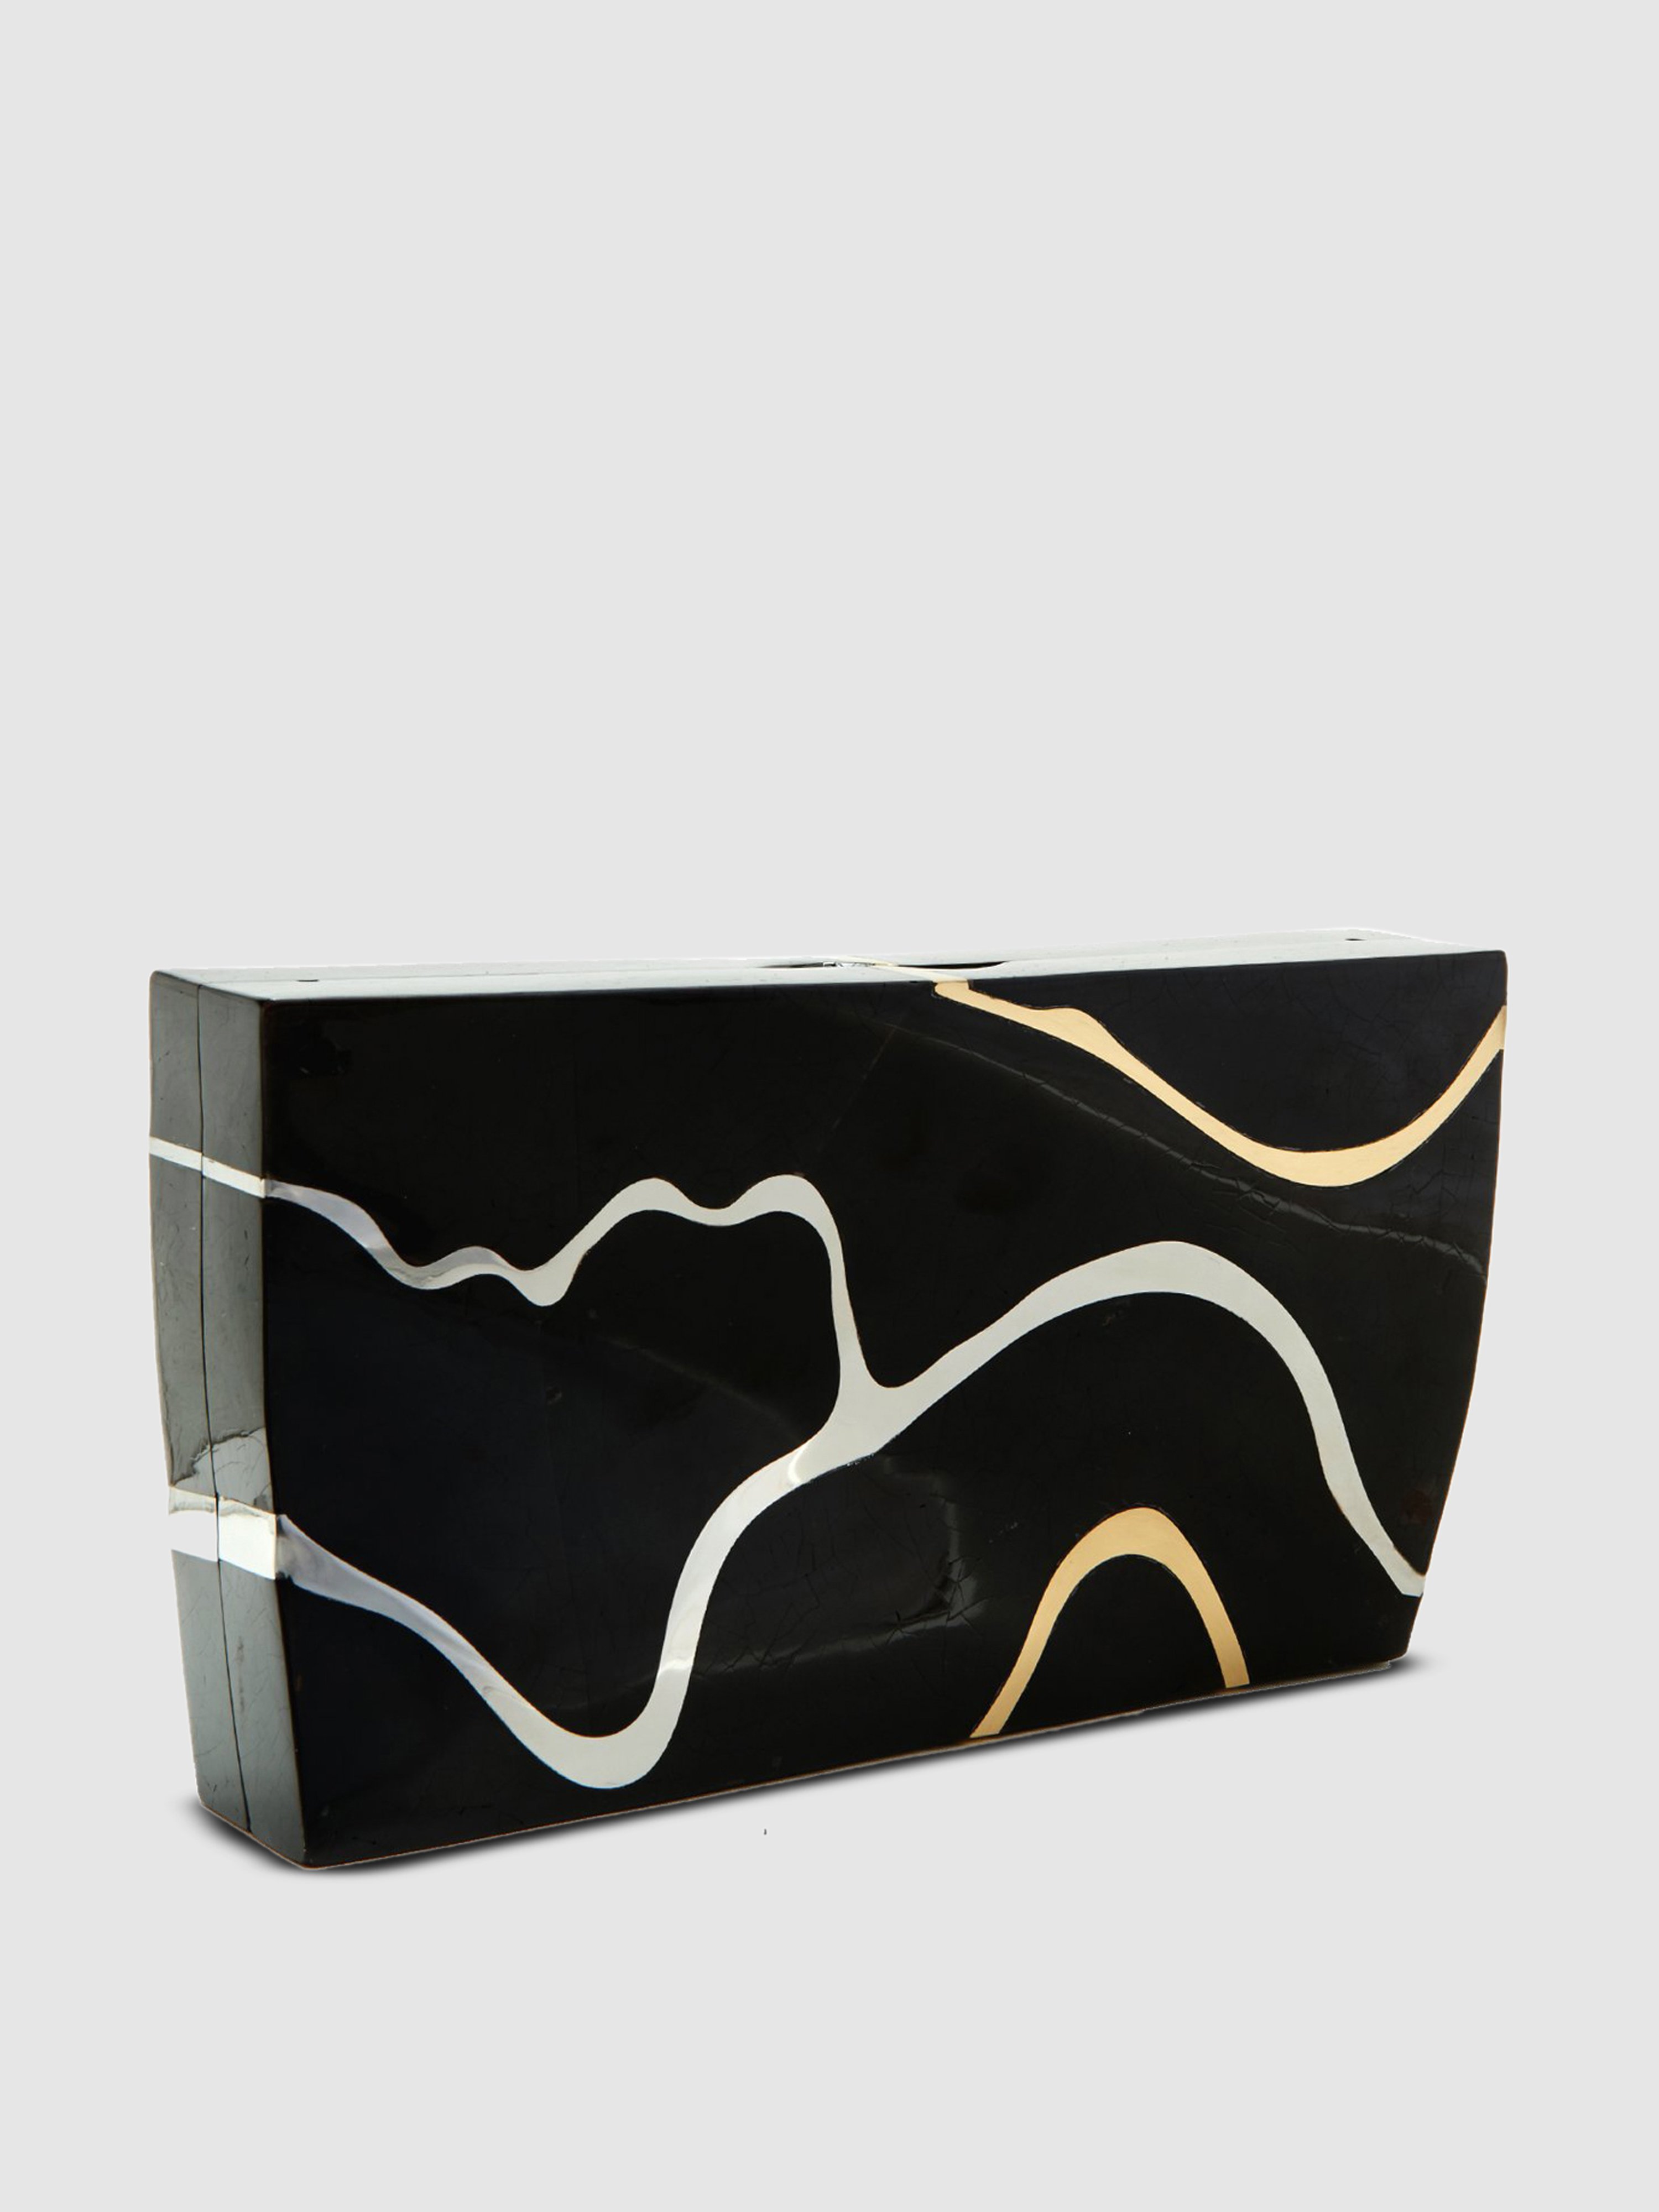 Emm Kuo Gehry Clutch In Black